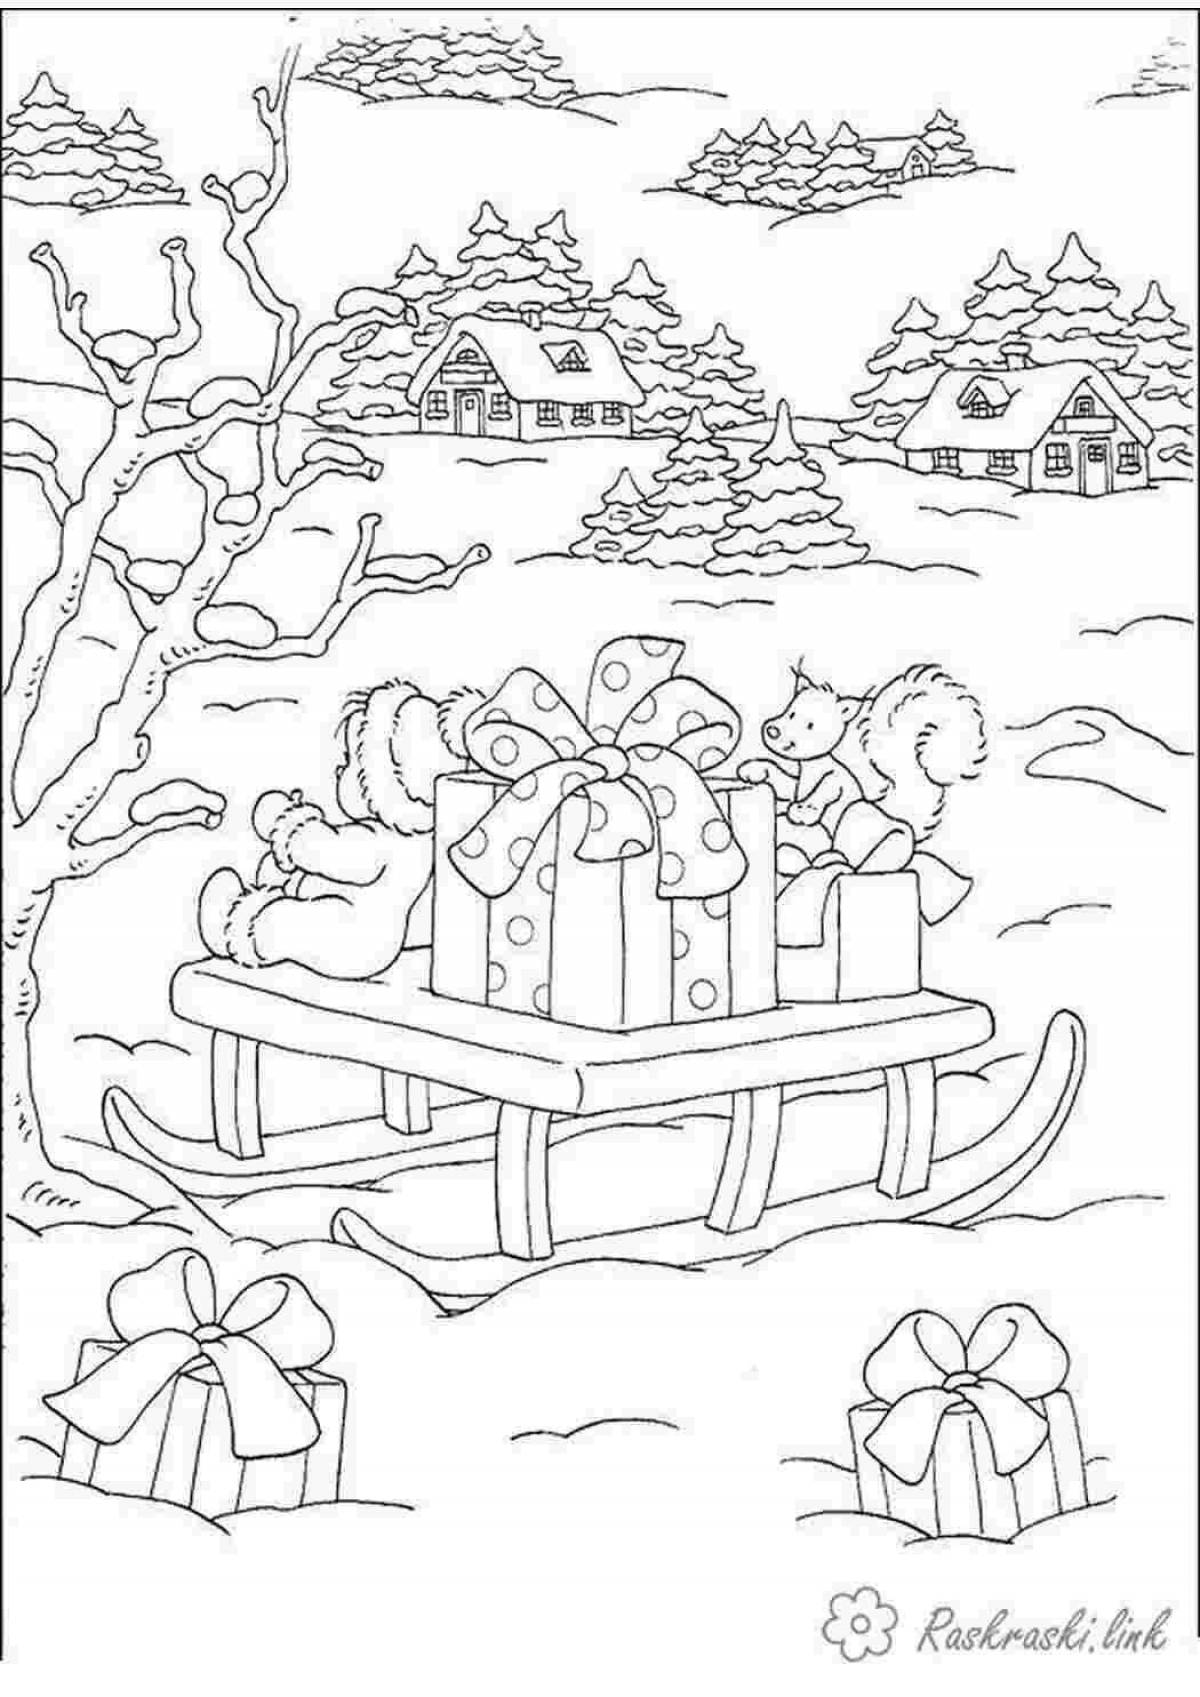 Gorgeous Winter Fantasy Coloring Page